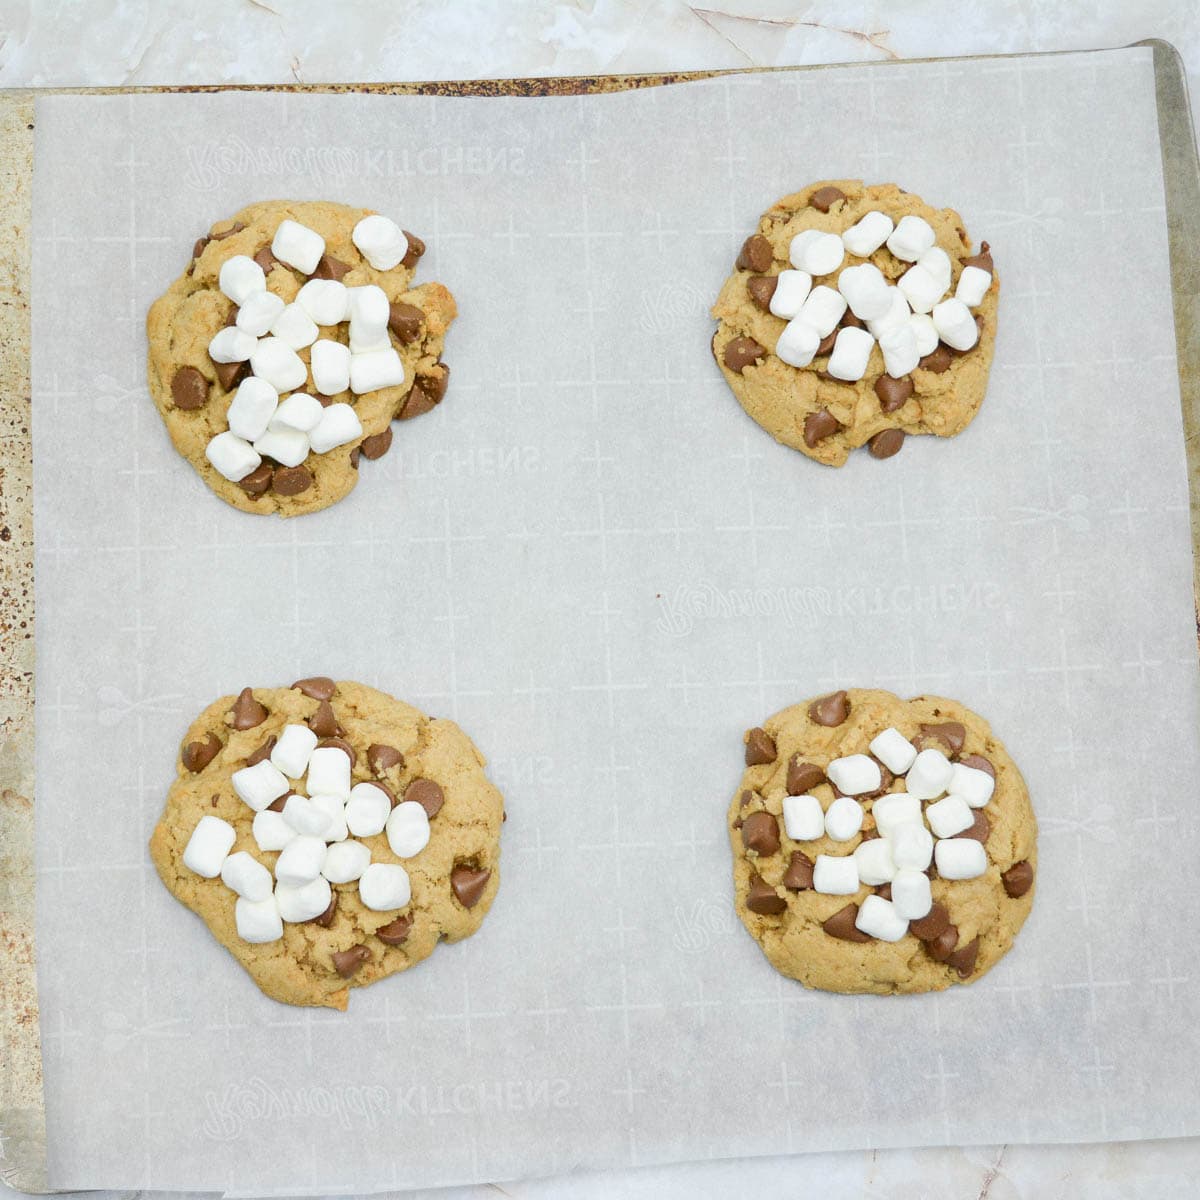 Four s'mores cookies on a baking sheet.